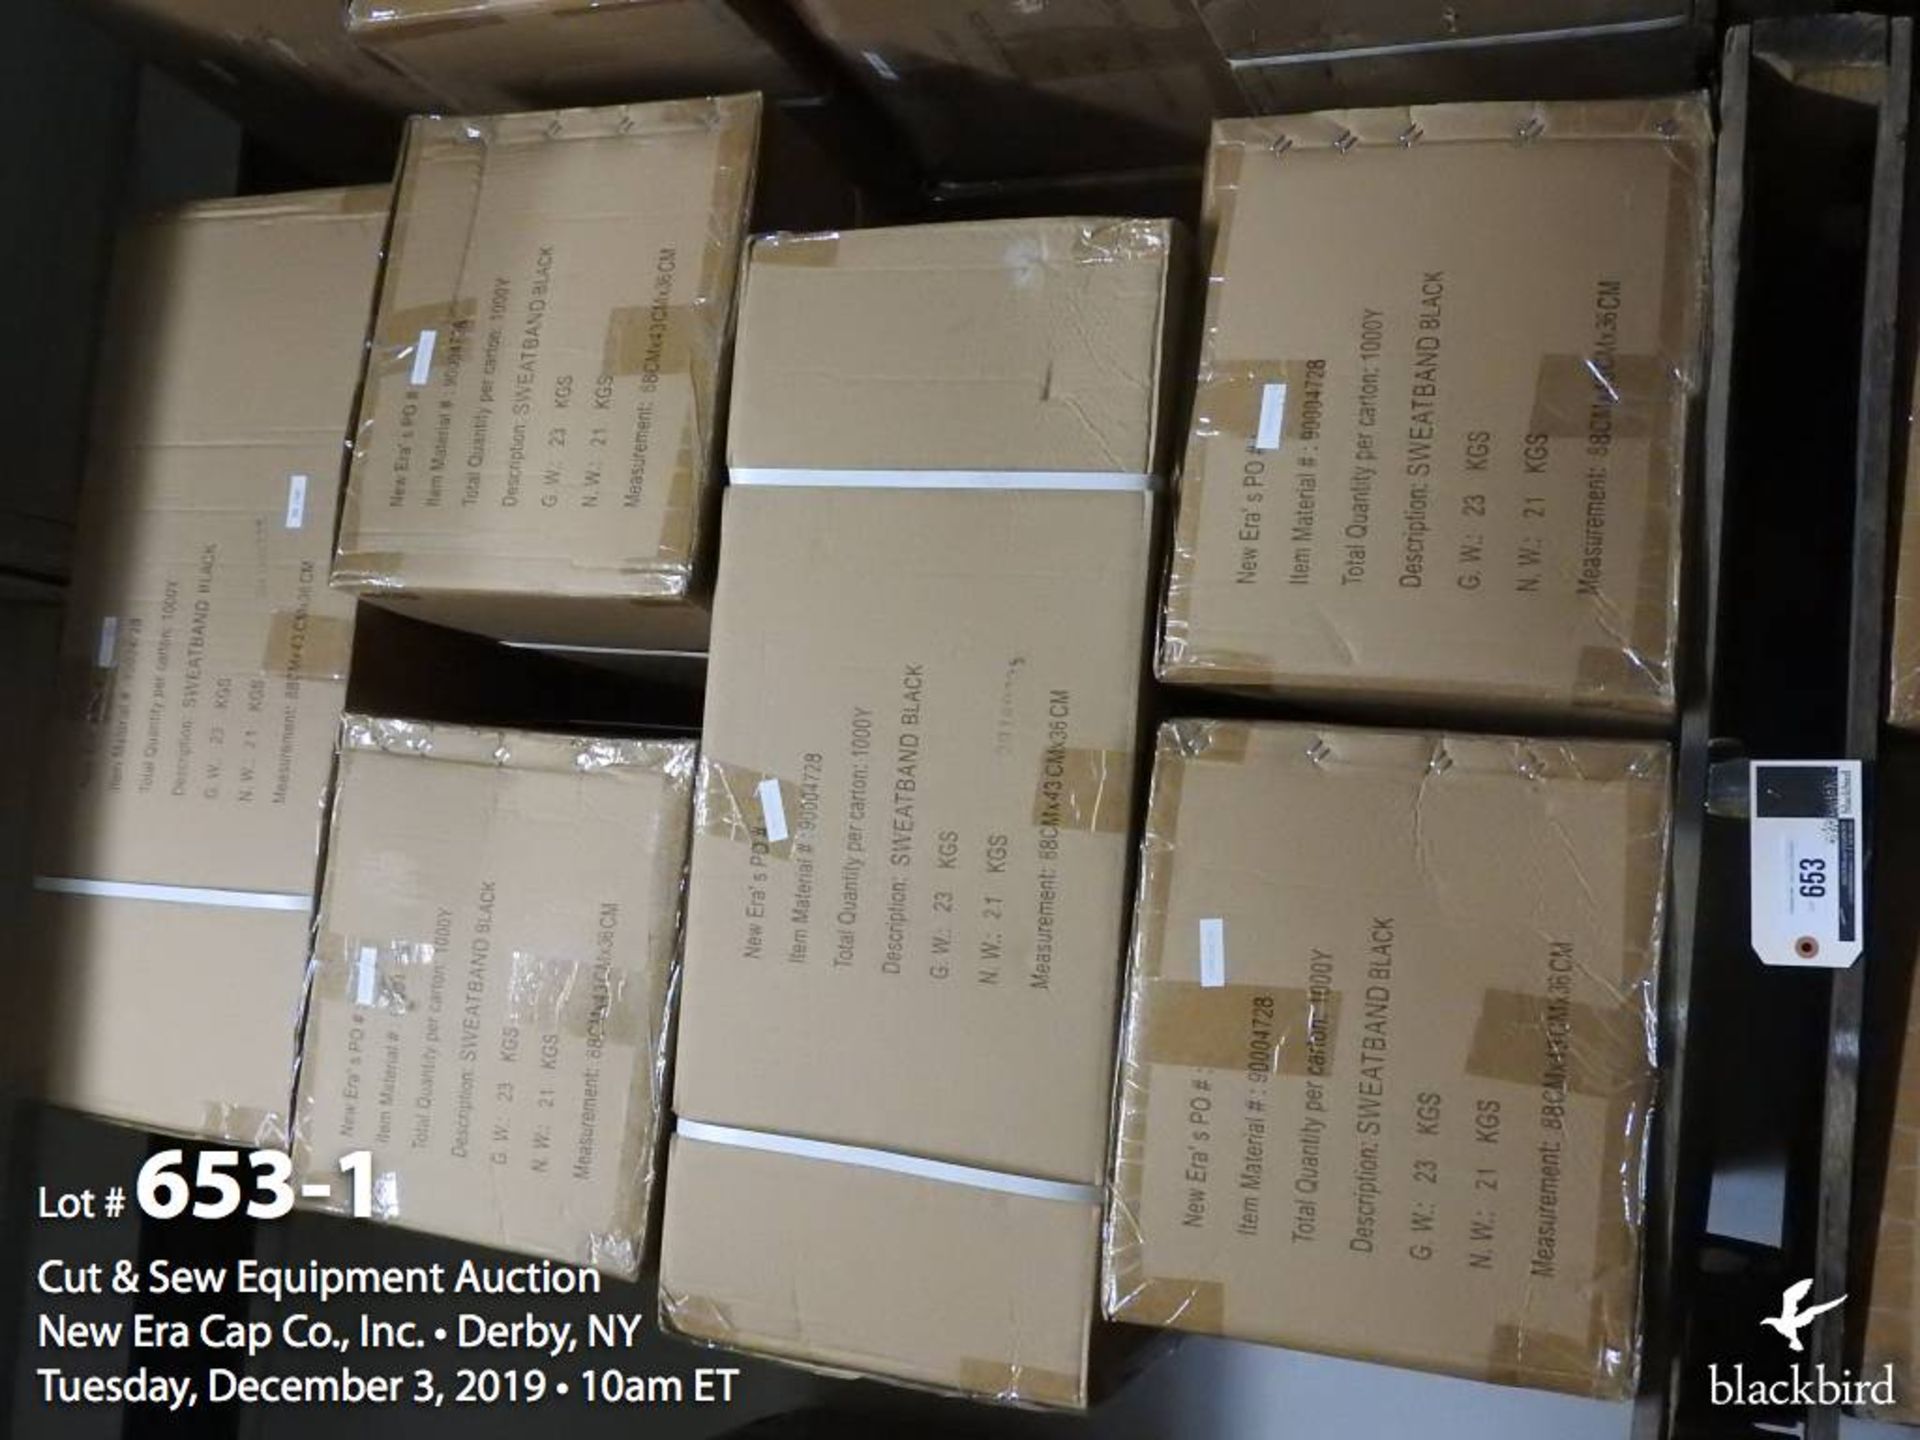 Pallet of (15) boxes of black sweatbands